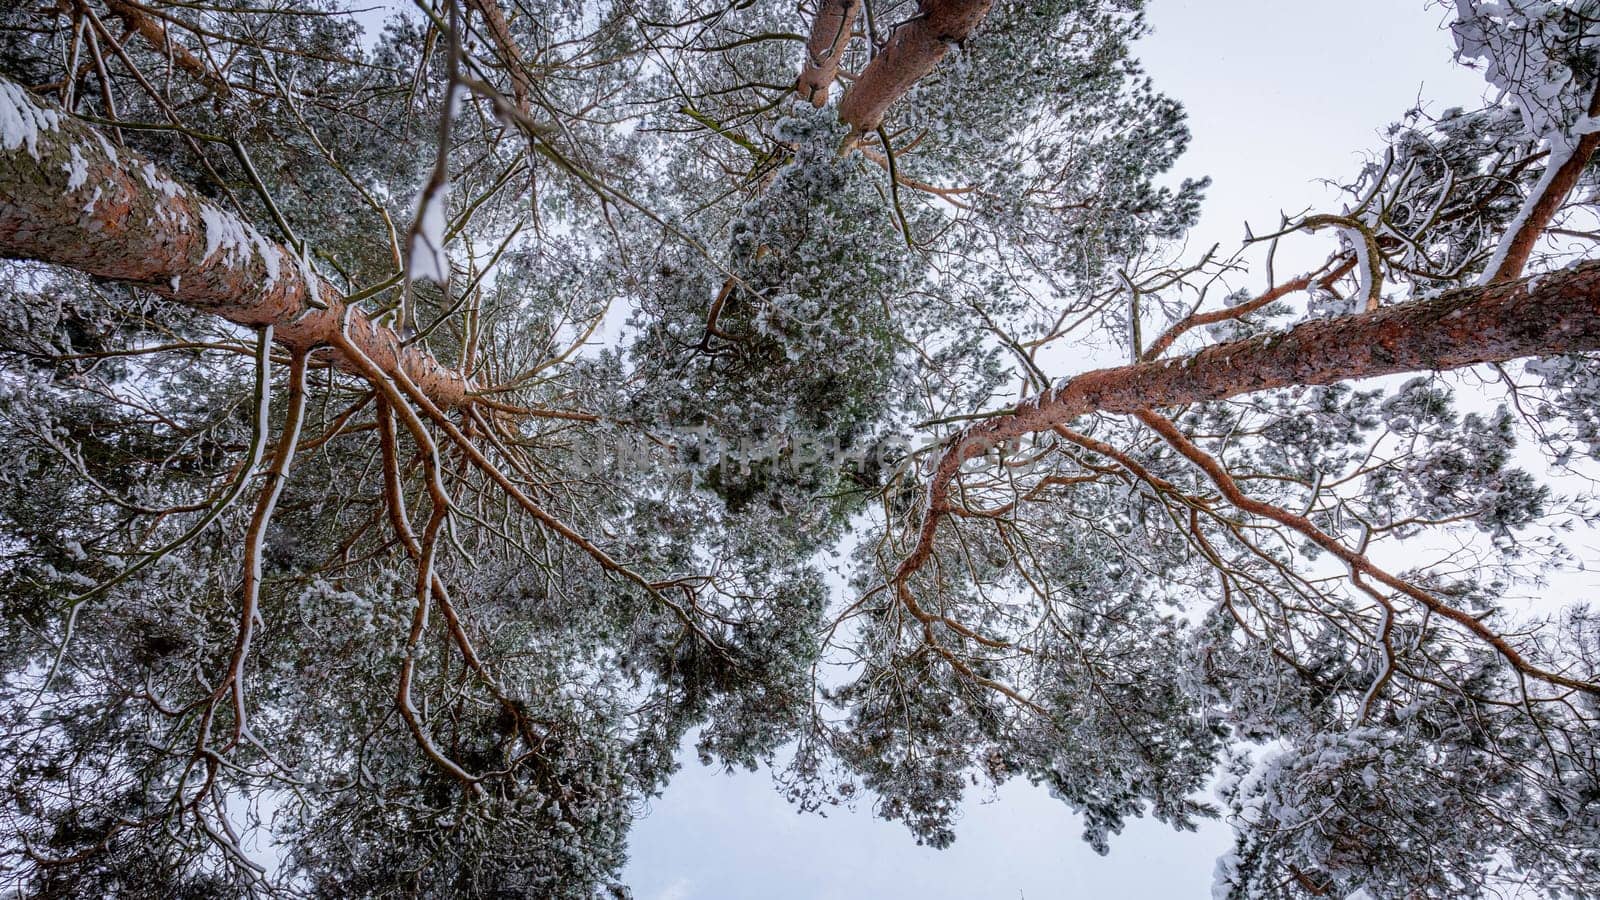 Snow-capped pine tops, bottom view between tall trunks and clear sky by grekoni